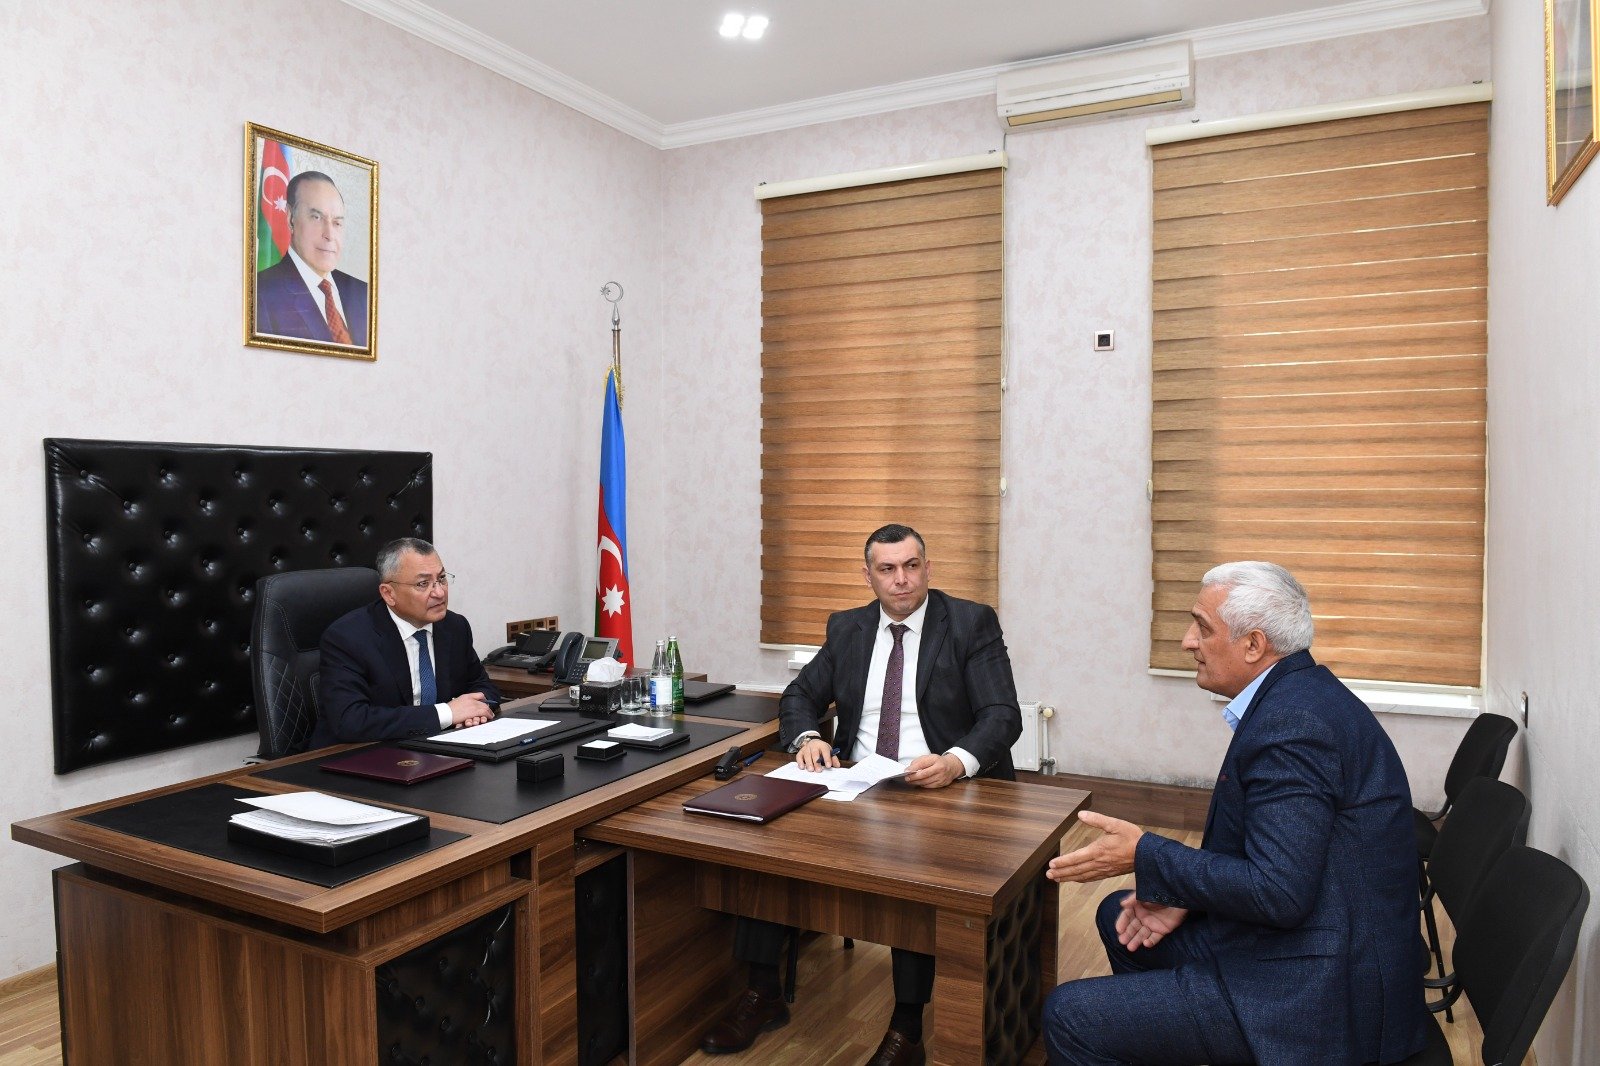 Chairman of State Committee meets with residents of Sus village of Azerbaijan's Lachin district